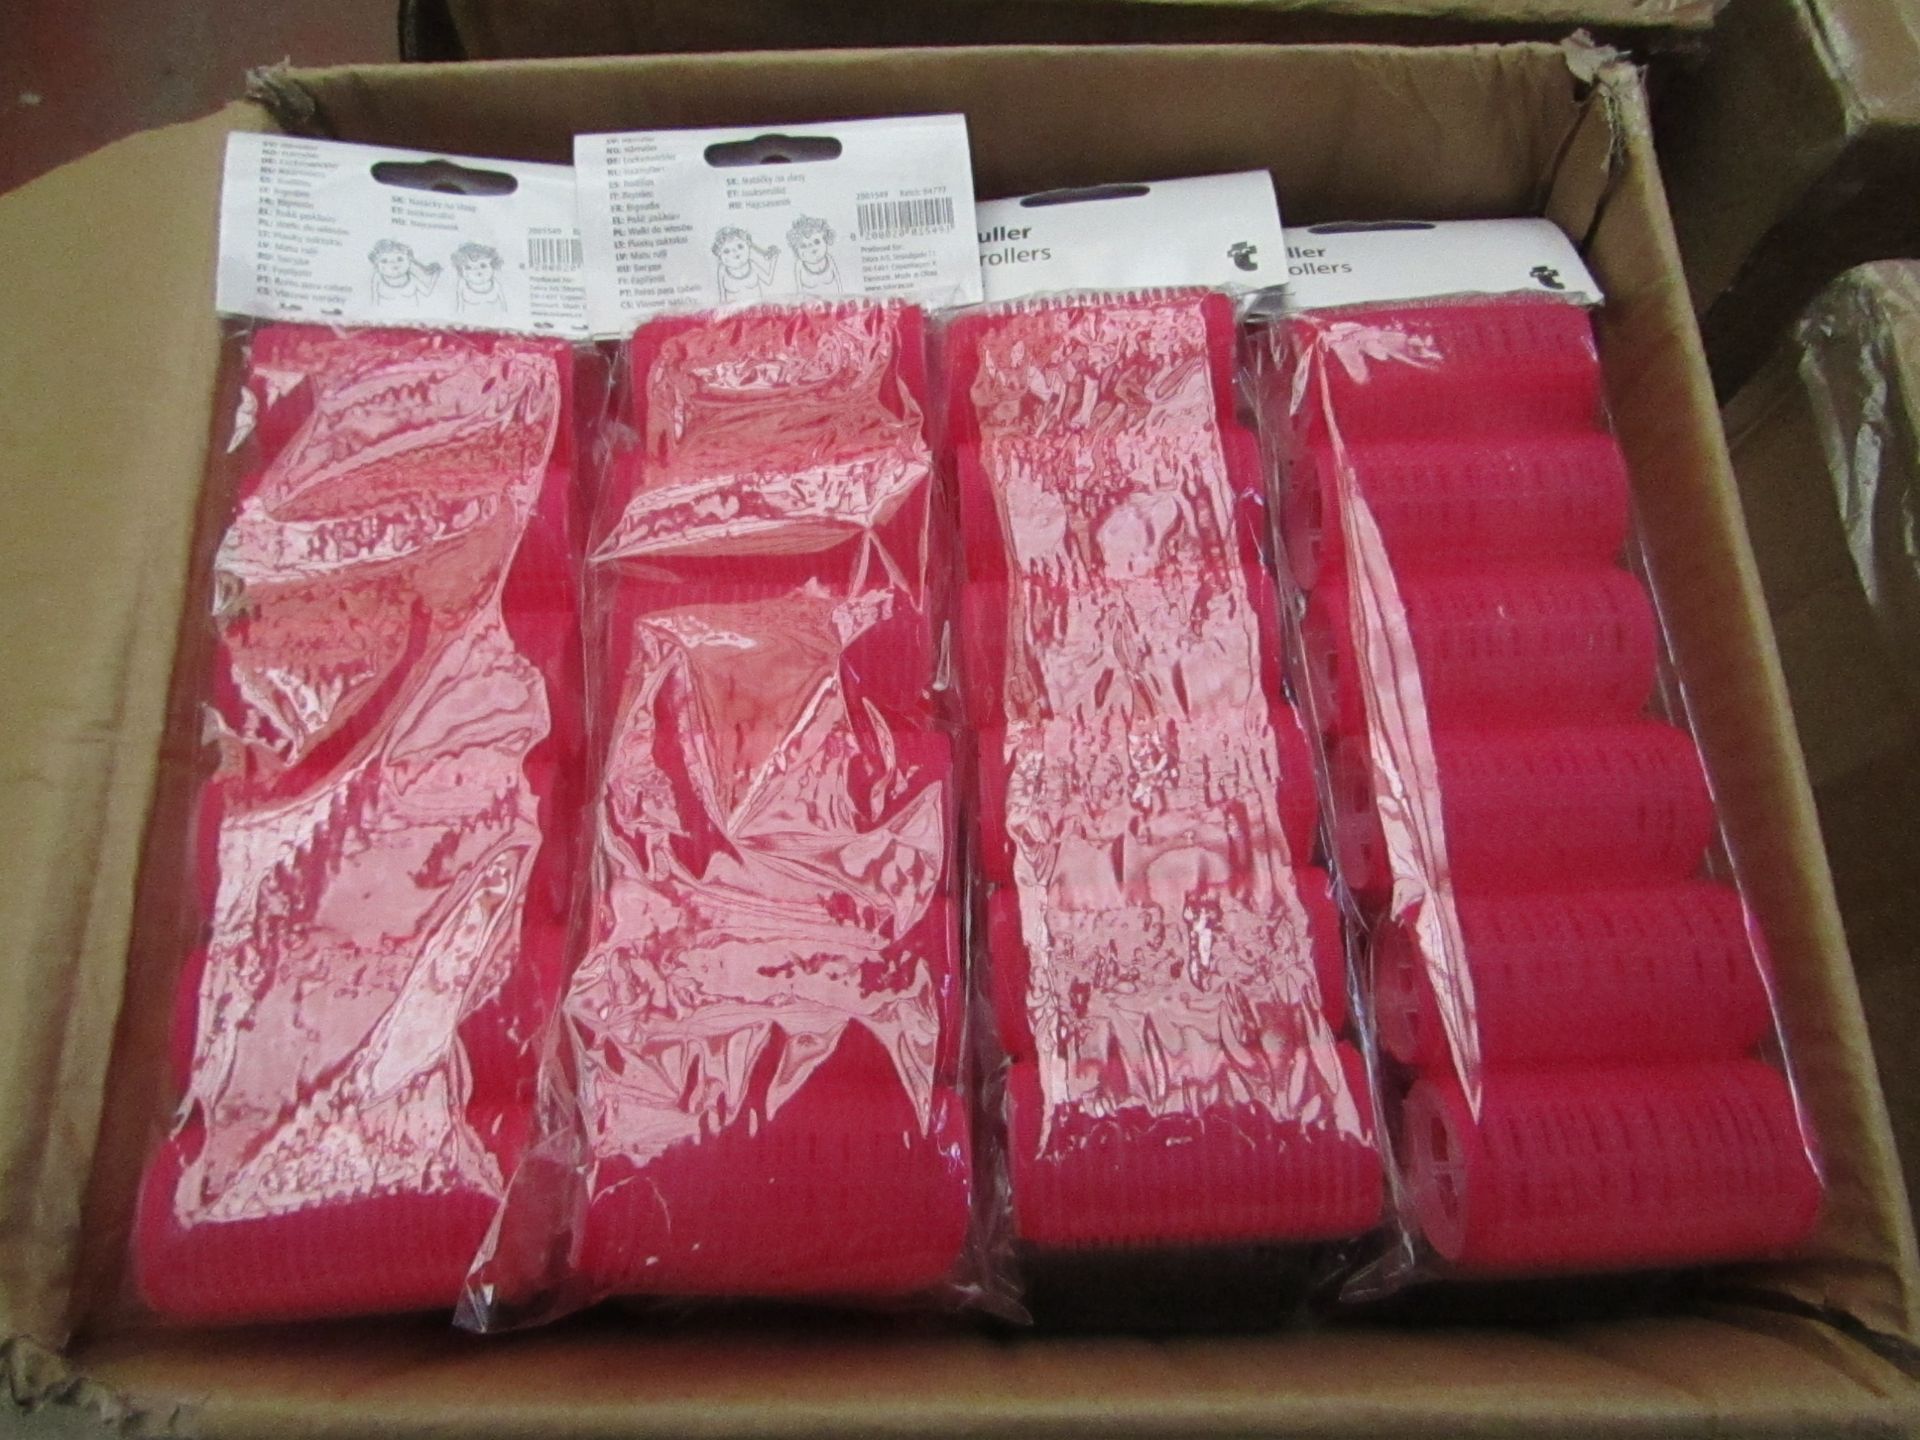 2x Boxes each containing 24 pink hair rollers, all new and packaged.